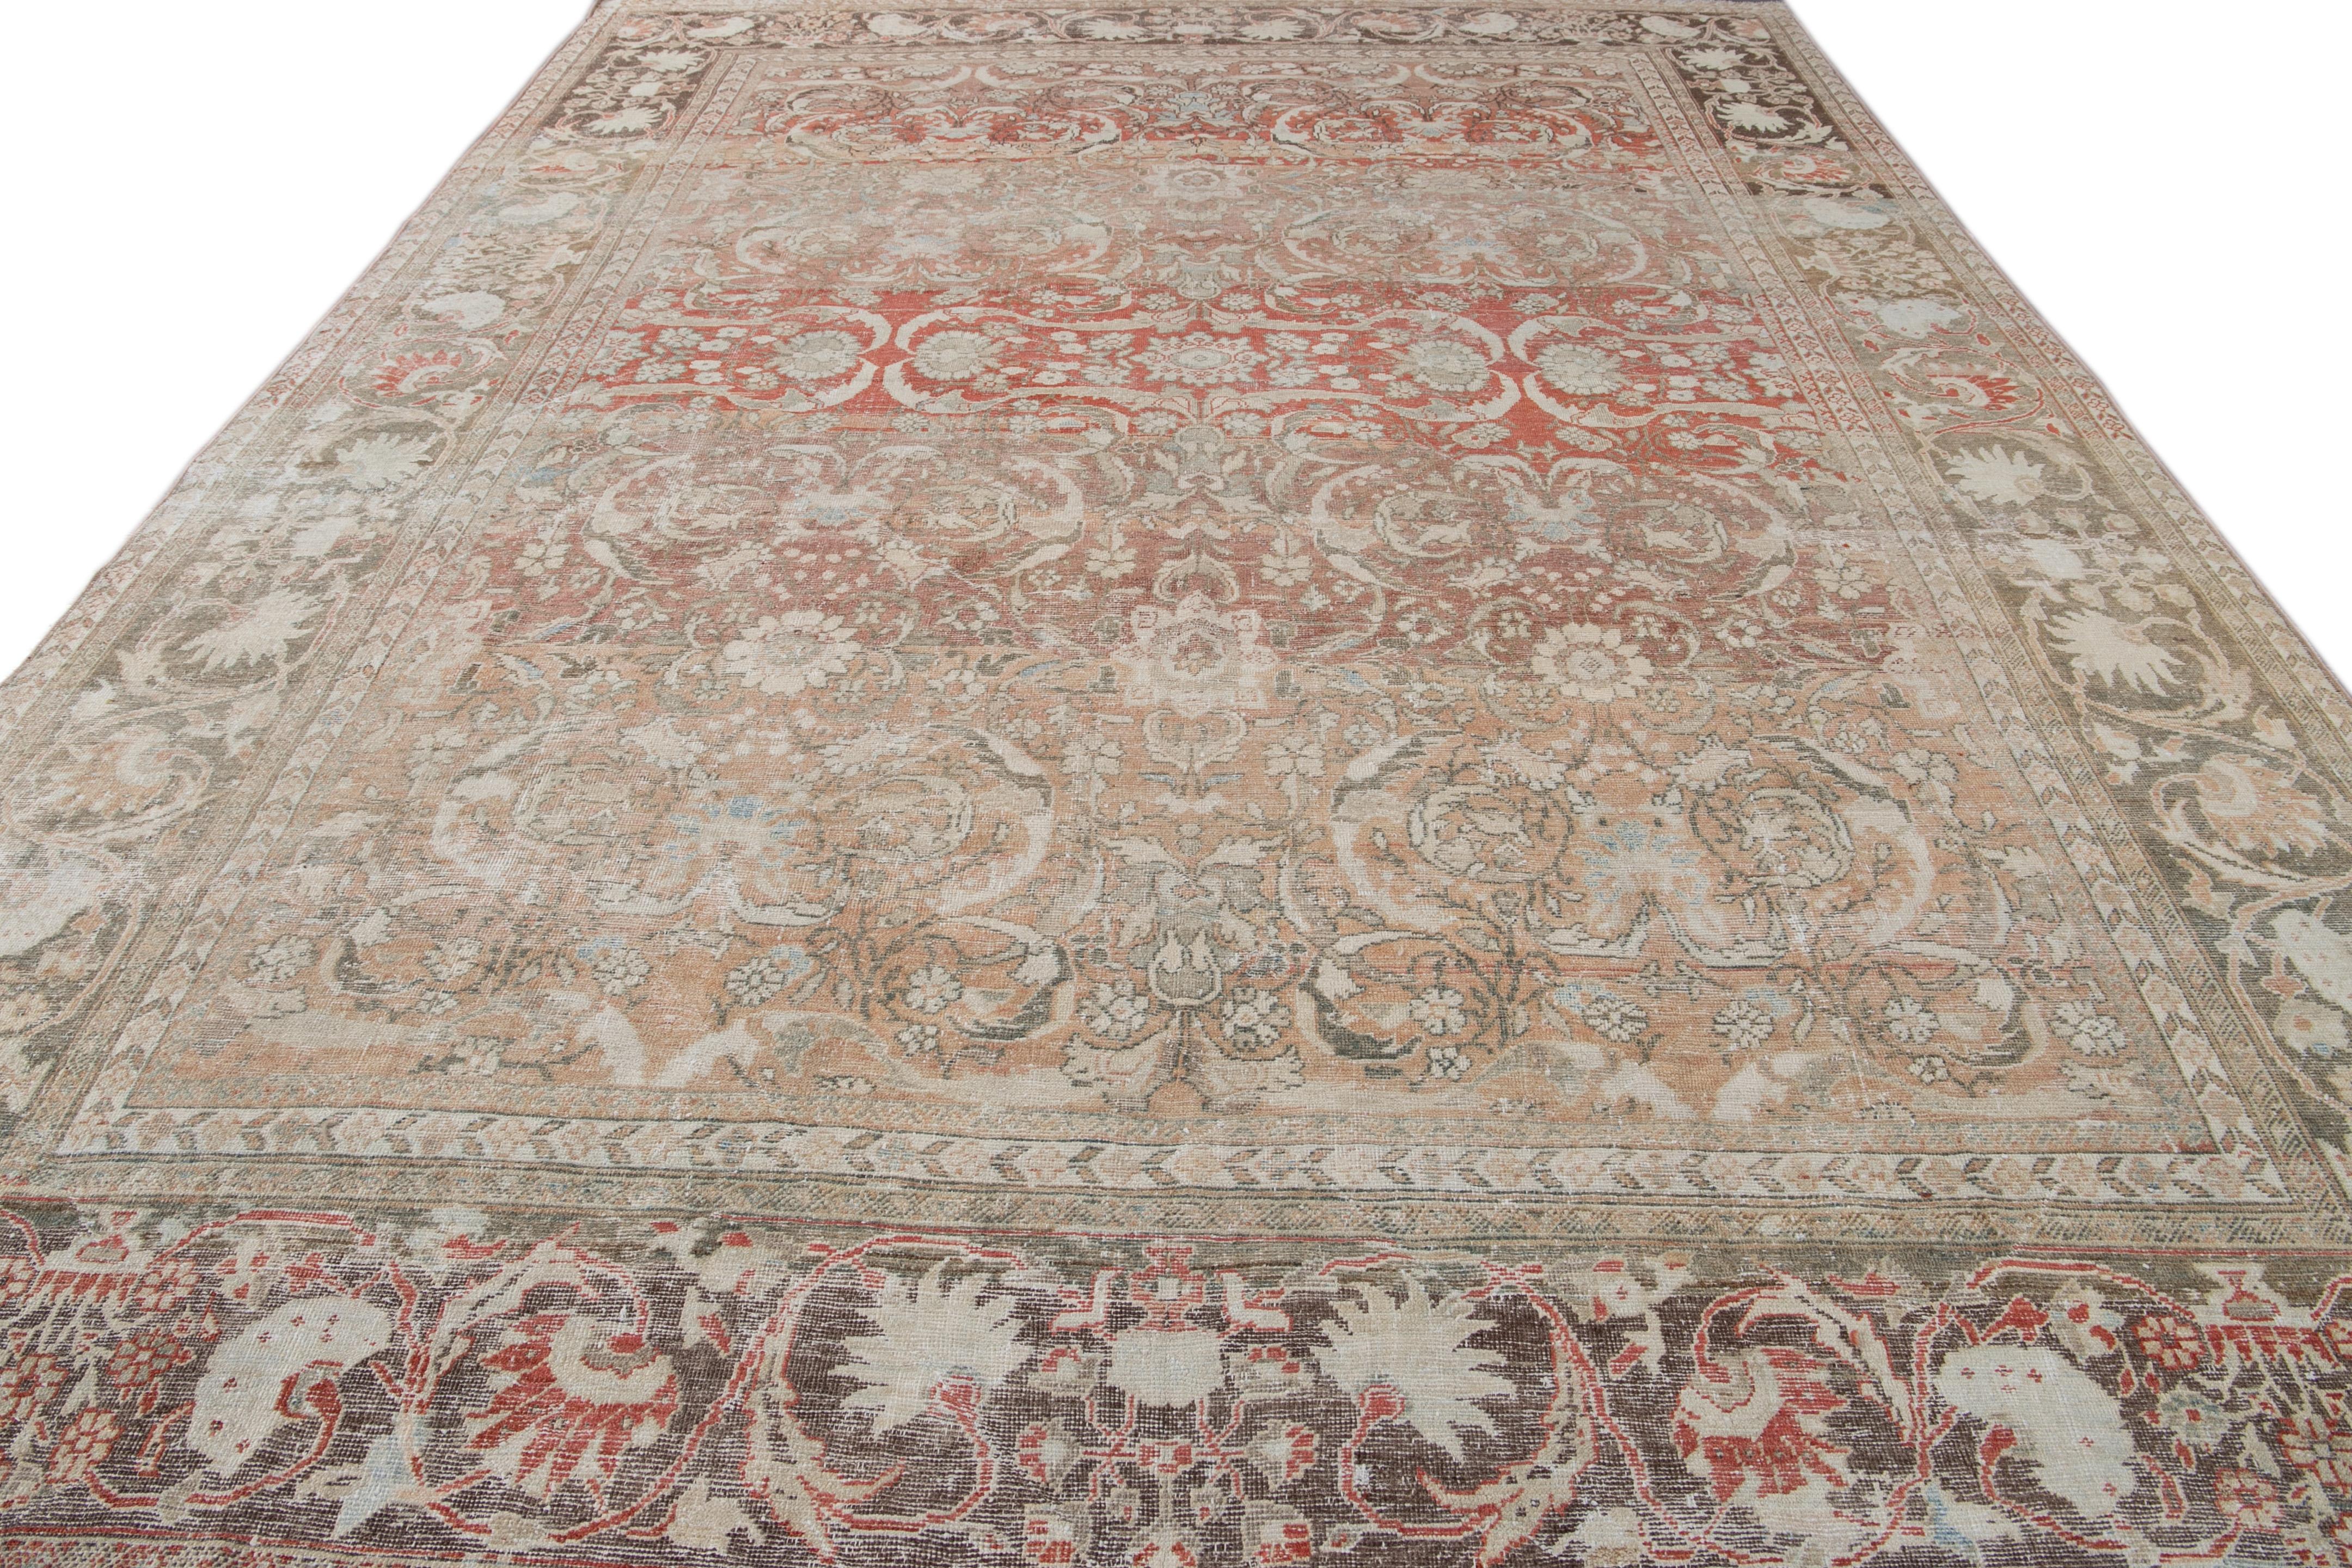 Islamic Antique Shabby Chic Red Mahal Wool Rug For Sale